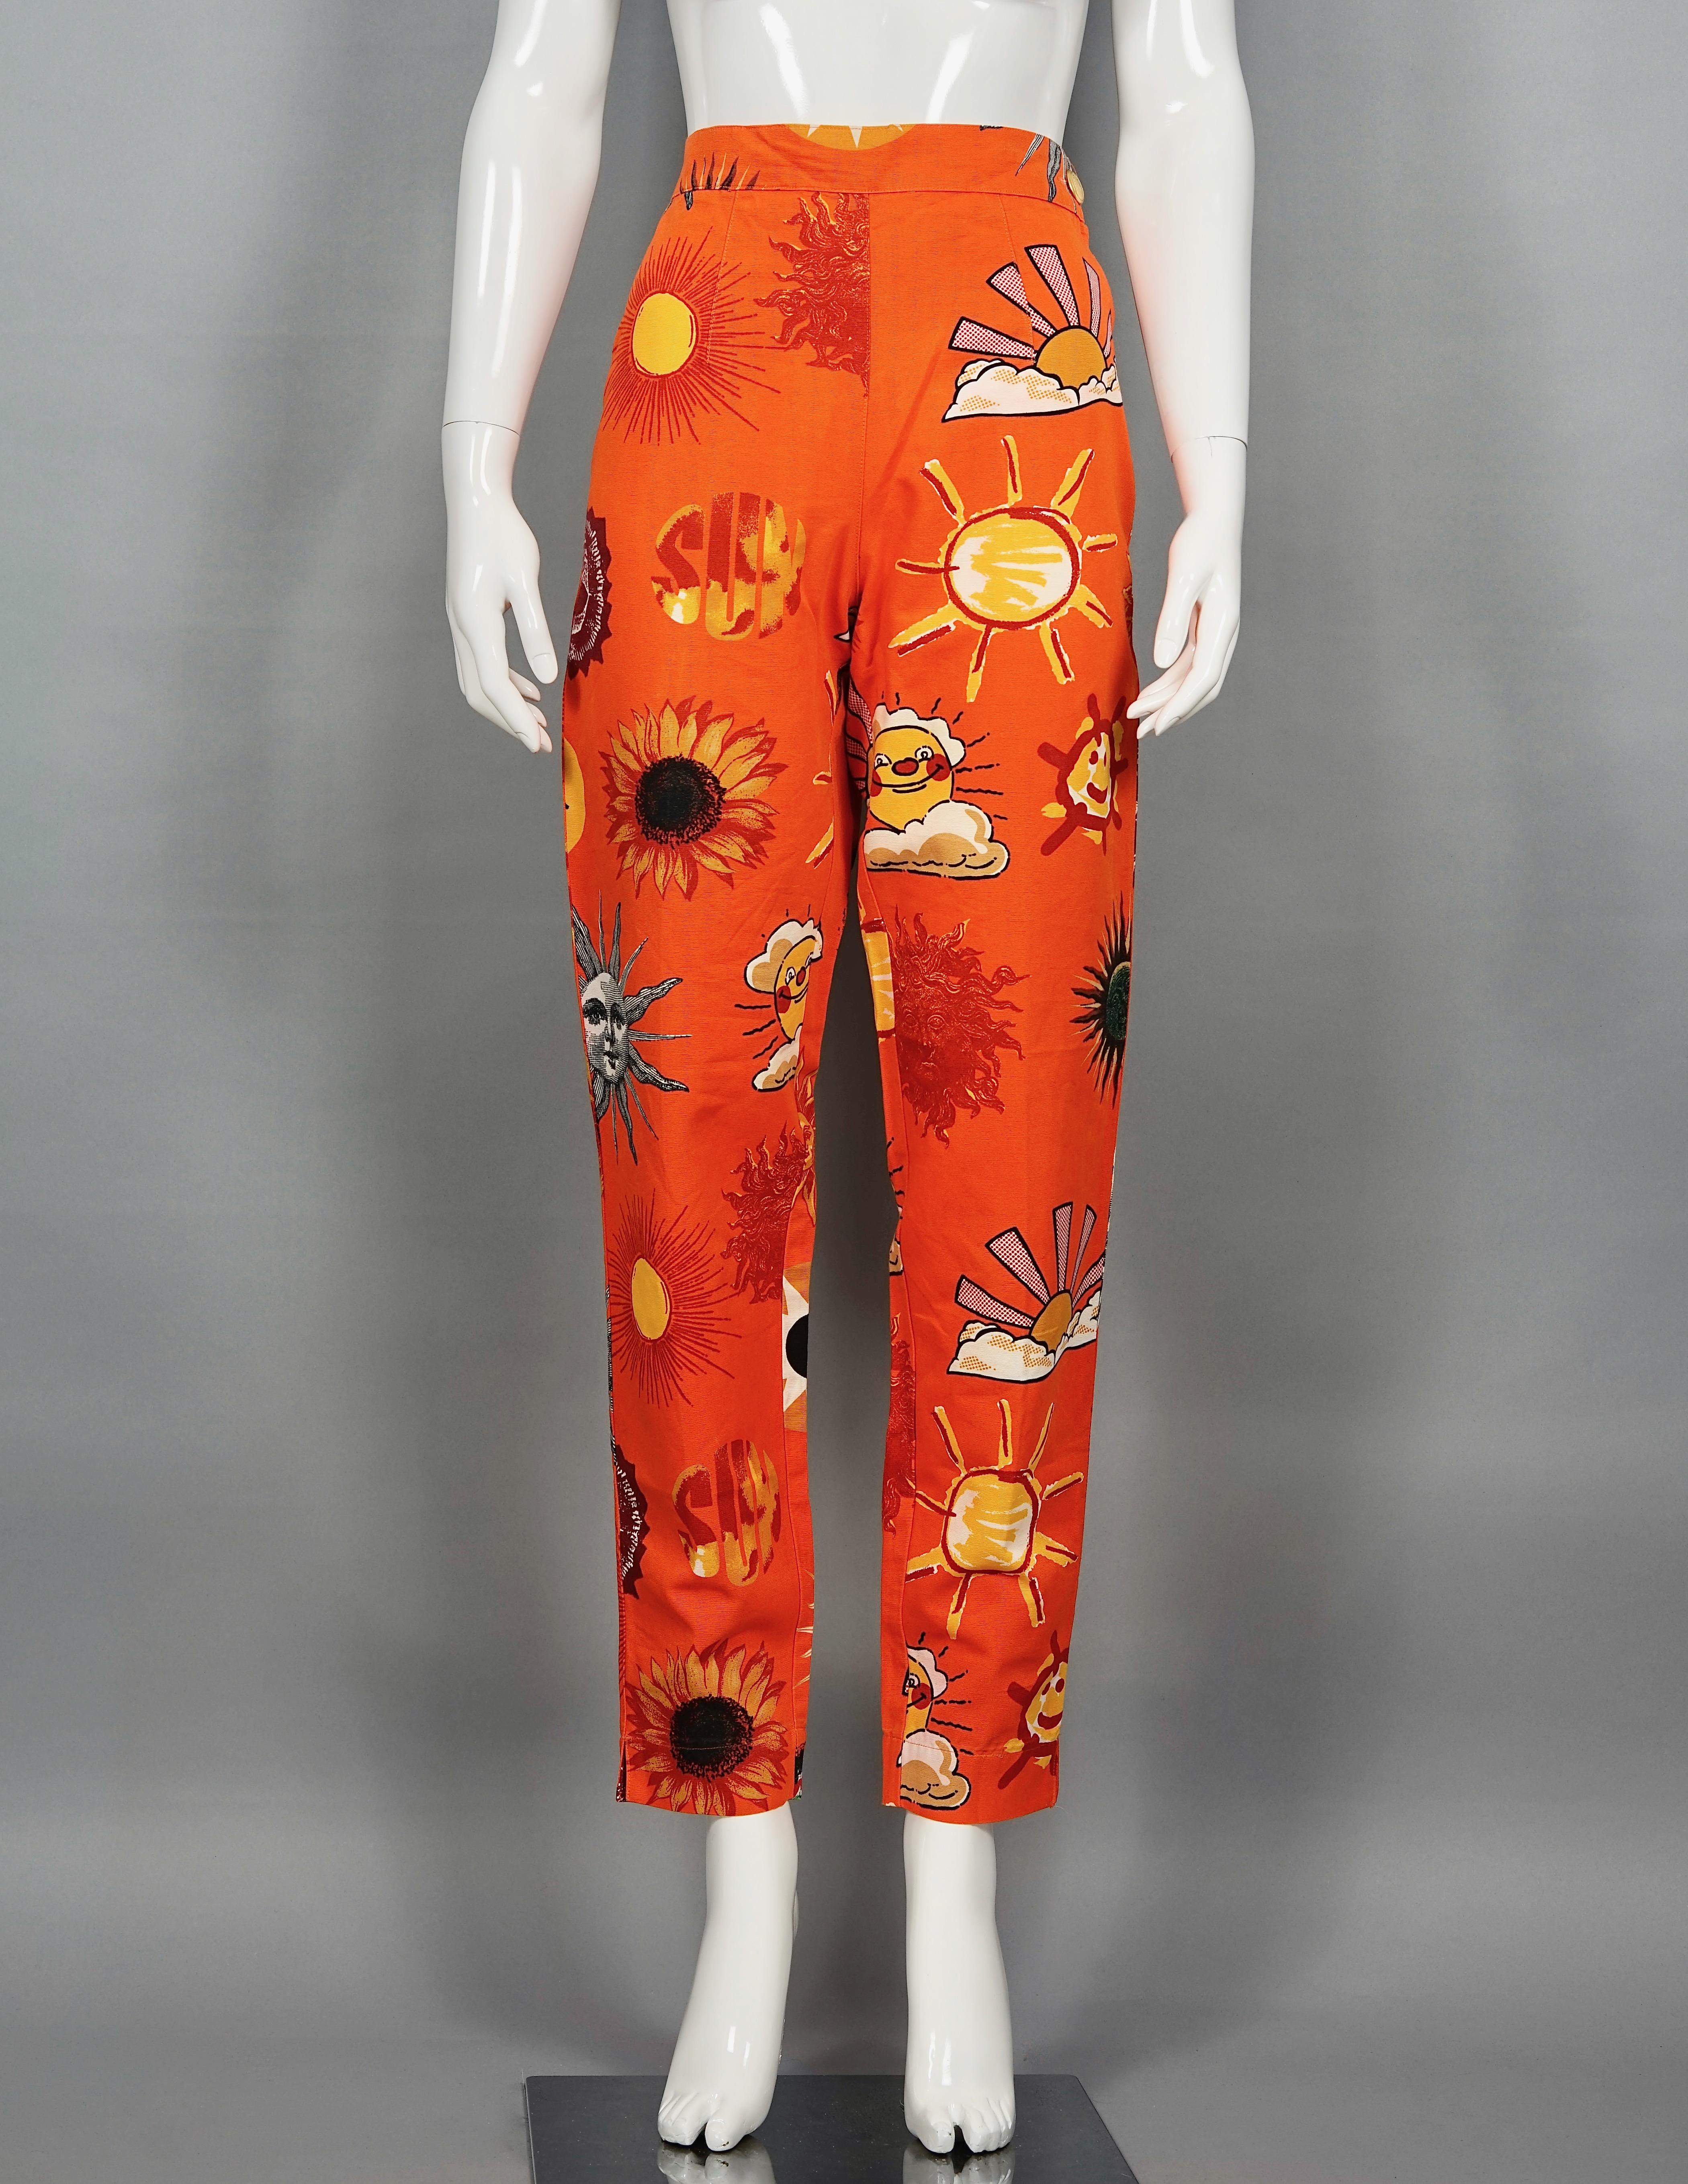 Vintage MOSCHINO JEANS Summer Sun Fun Print Pants

Measurements taken laid flat, please double waist and hips:
Waist: 14.56 inches (37 cm)
Hips: 20.47 inches (52 cm)
Length: 40.75 inches (103,5 cm)

Features:
- 100% Authentic MOSCHINO JEANS.
-